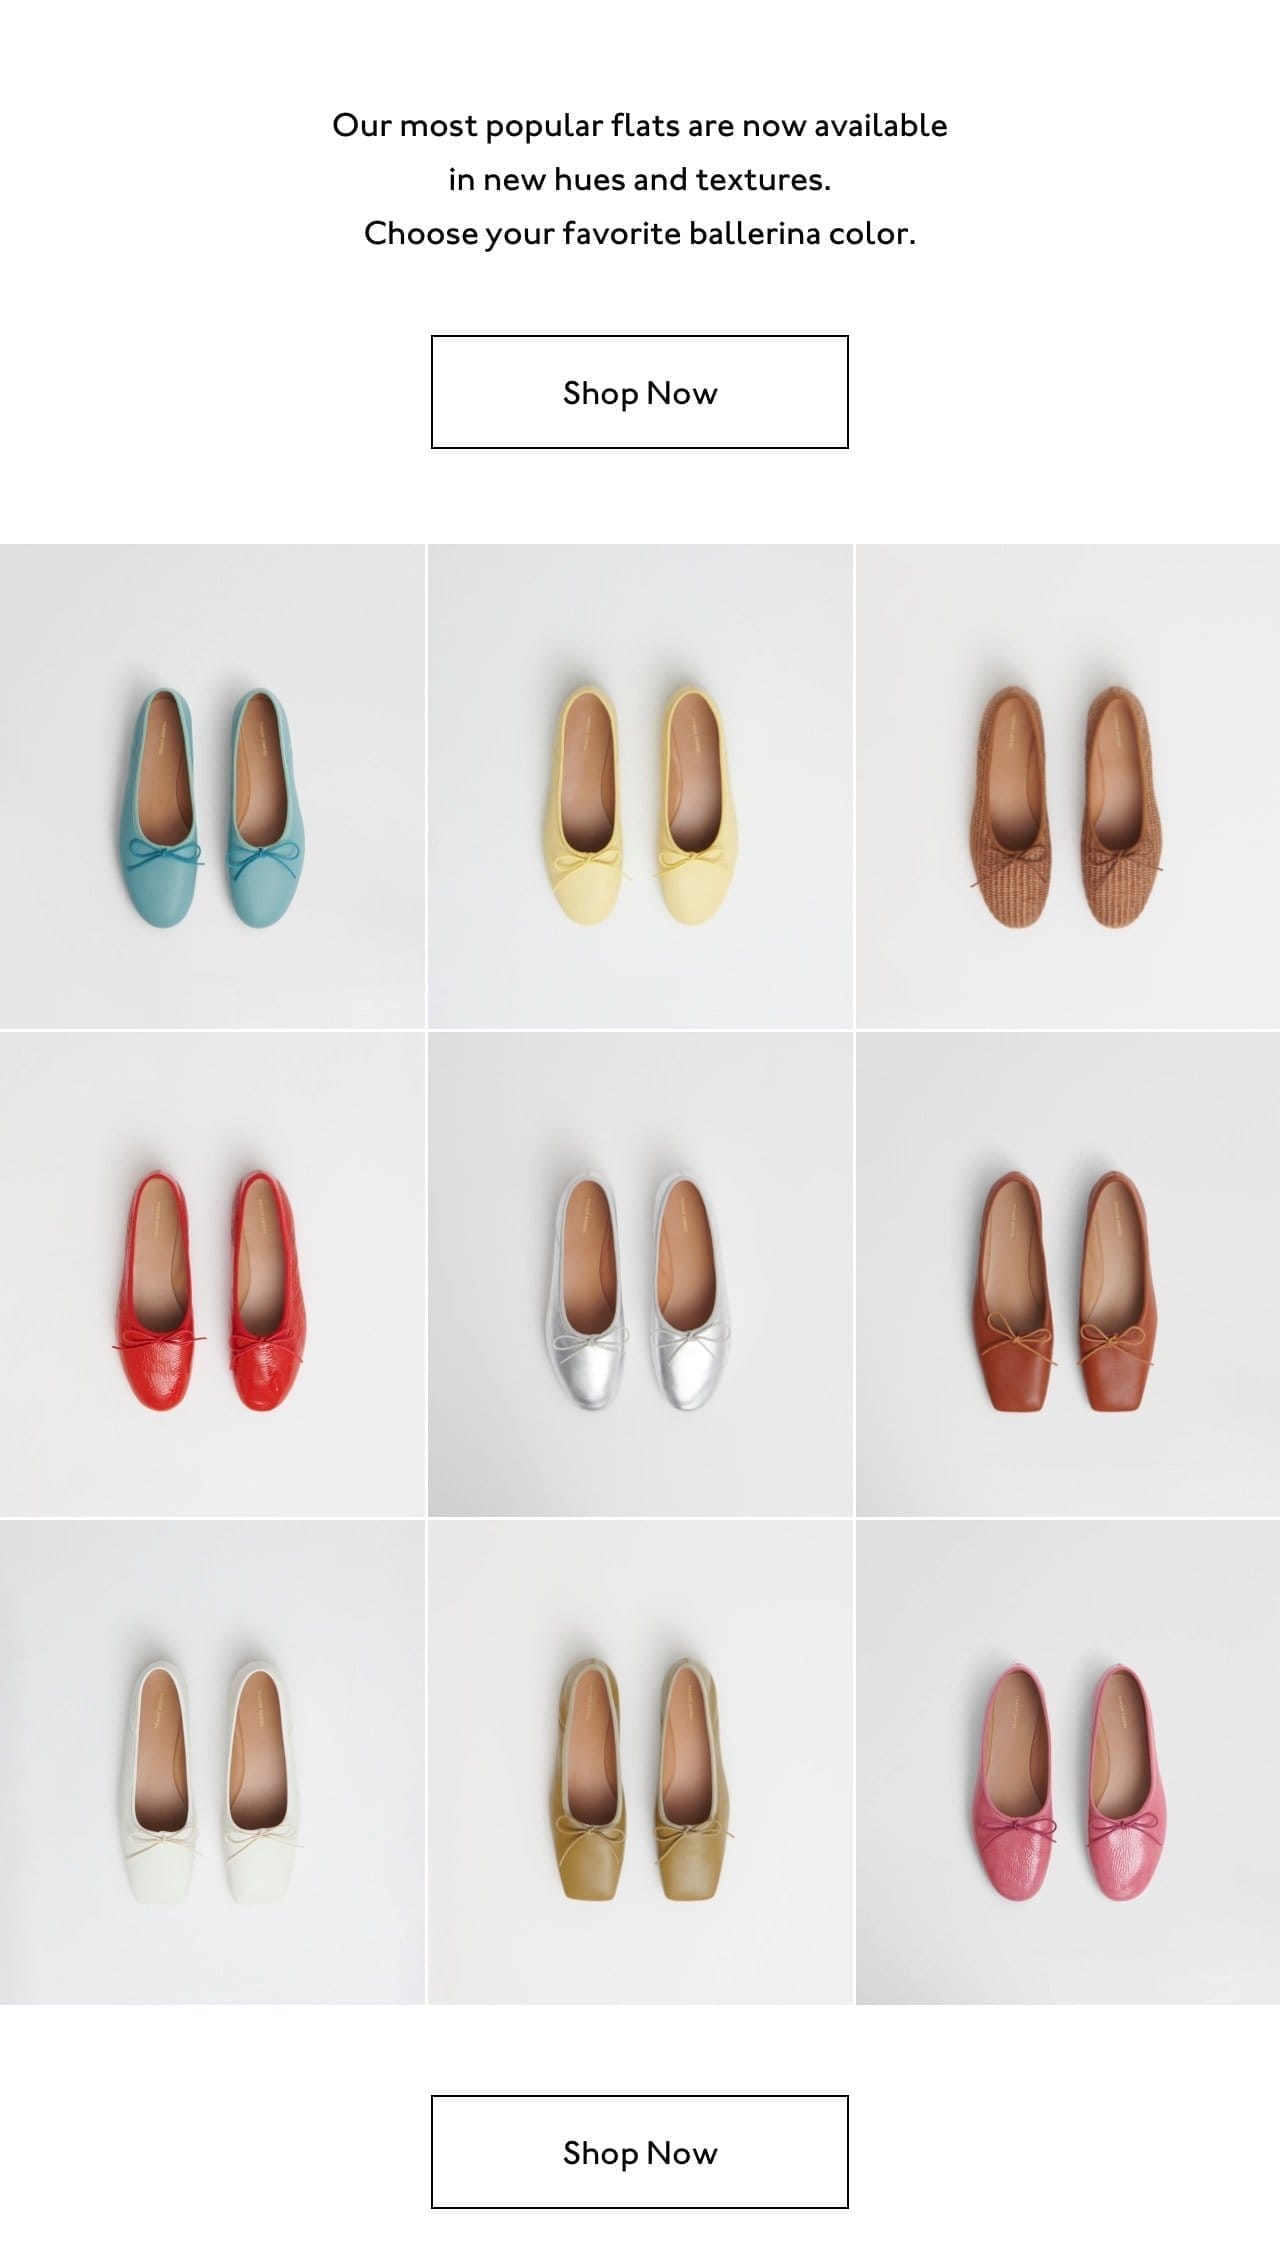 Choose your favorite ballerina color now.